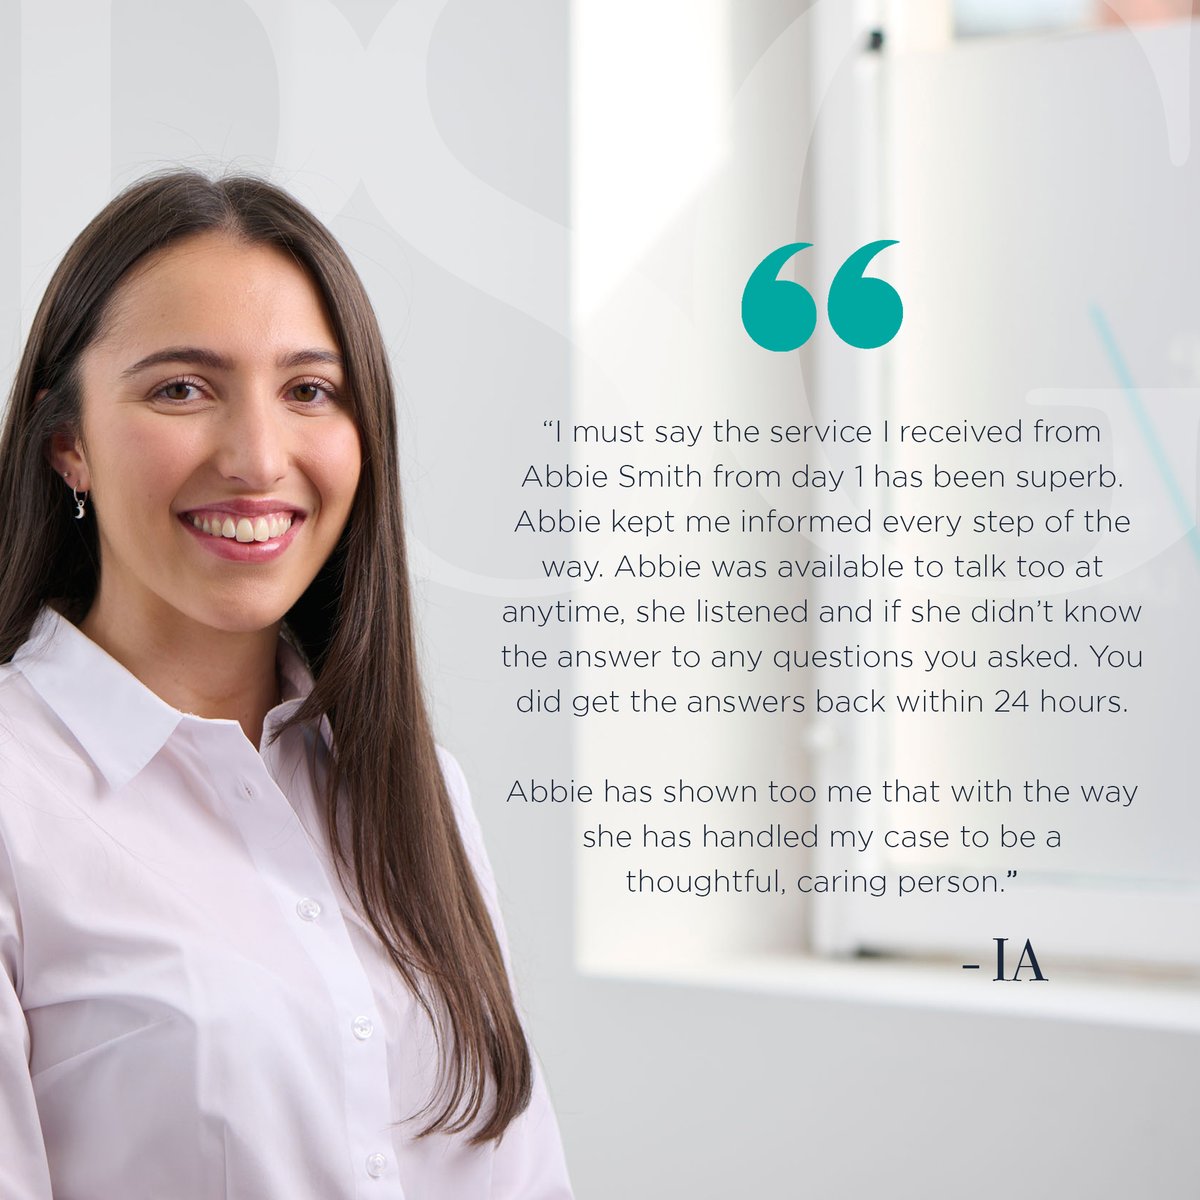 Abbie Smith, a trainee solicitor from our Clinical Negligence department, has received some fantastic feedback from a client. This matter was involving poor management of medical conditions, as well as a failure to refer in a timely manner

#TraineeSolicitor #ClinicalNegligence